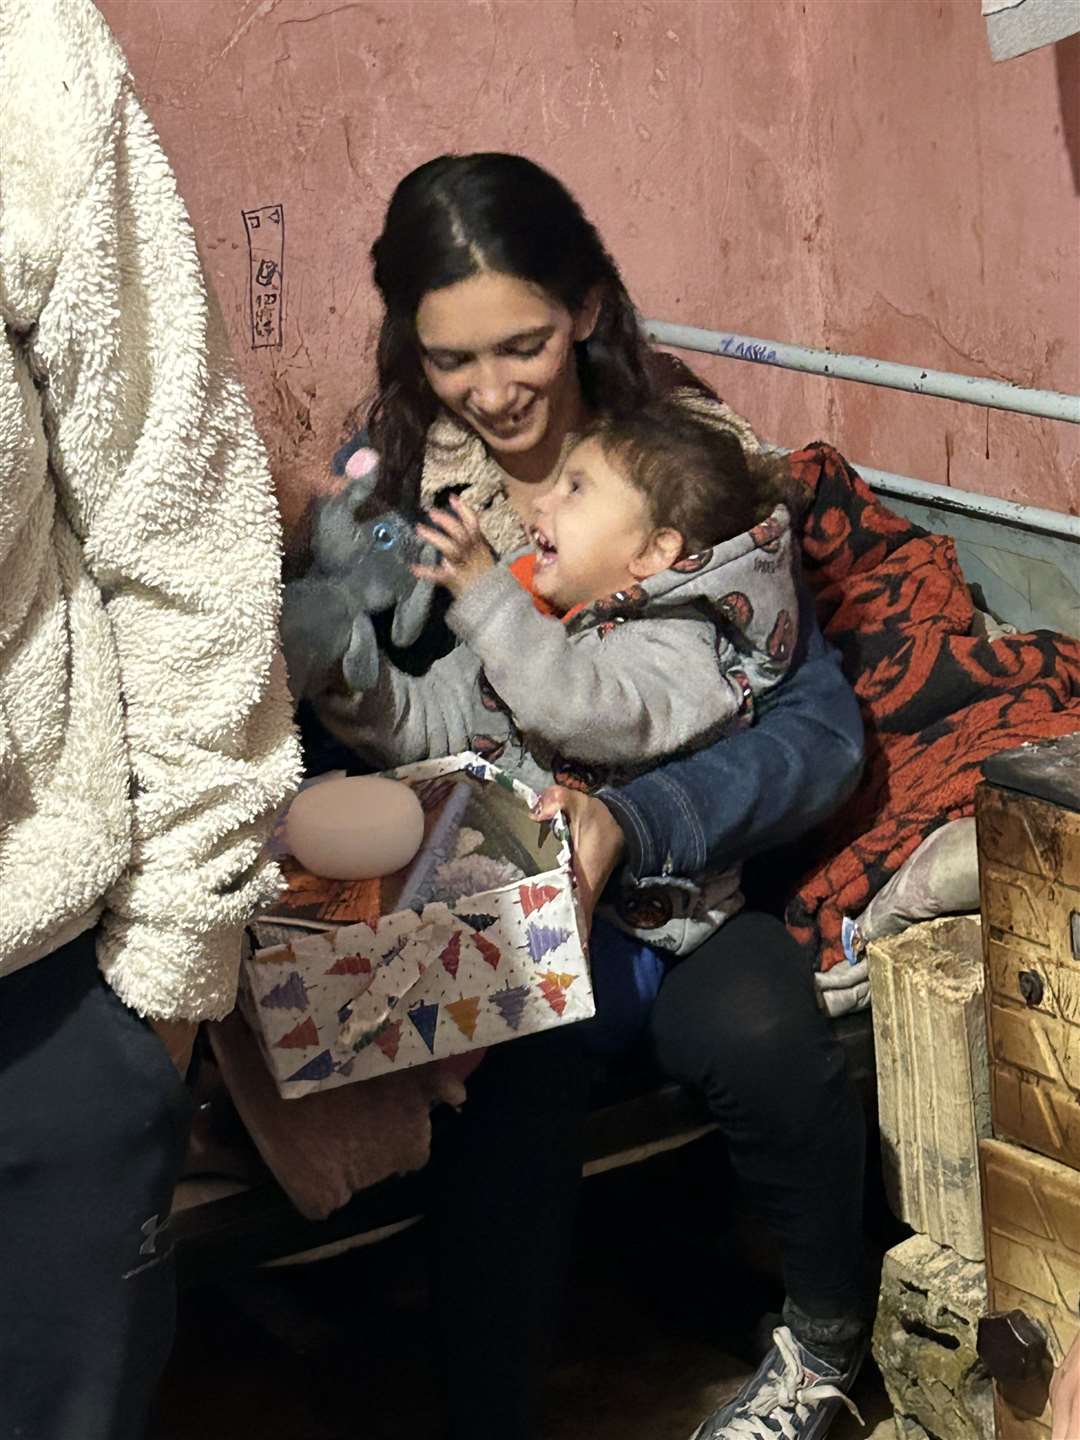 Sliven, Bulgaria, 9 December 2023: a child in a Roma community shows his delight atfinding a toy in his Blythswood shoebox